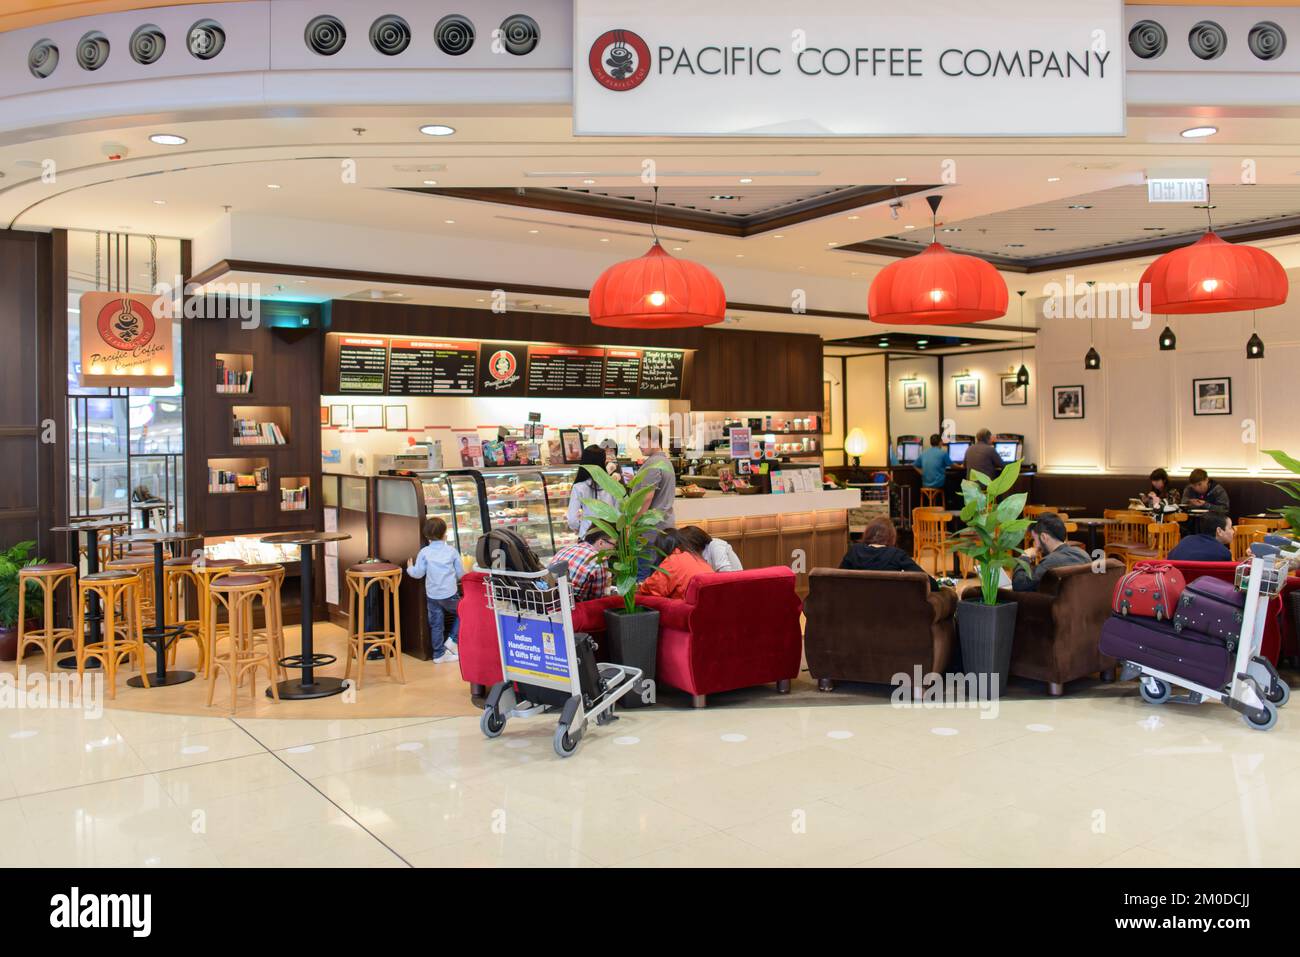 HONG KONG - APRIL 01: Pacific Coffee cafe in airport on April 01, 2014 in Hong Kong, China. Pacific Coffee Company is a Pacific Northwest U.S.-style c Stock Photo